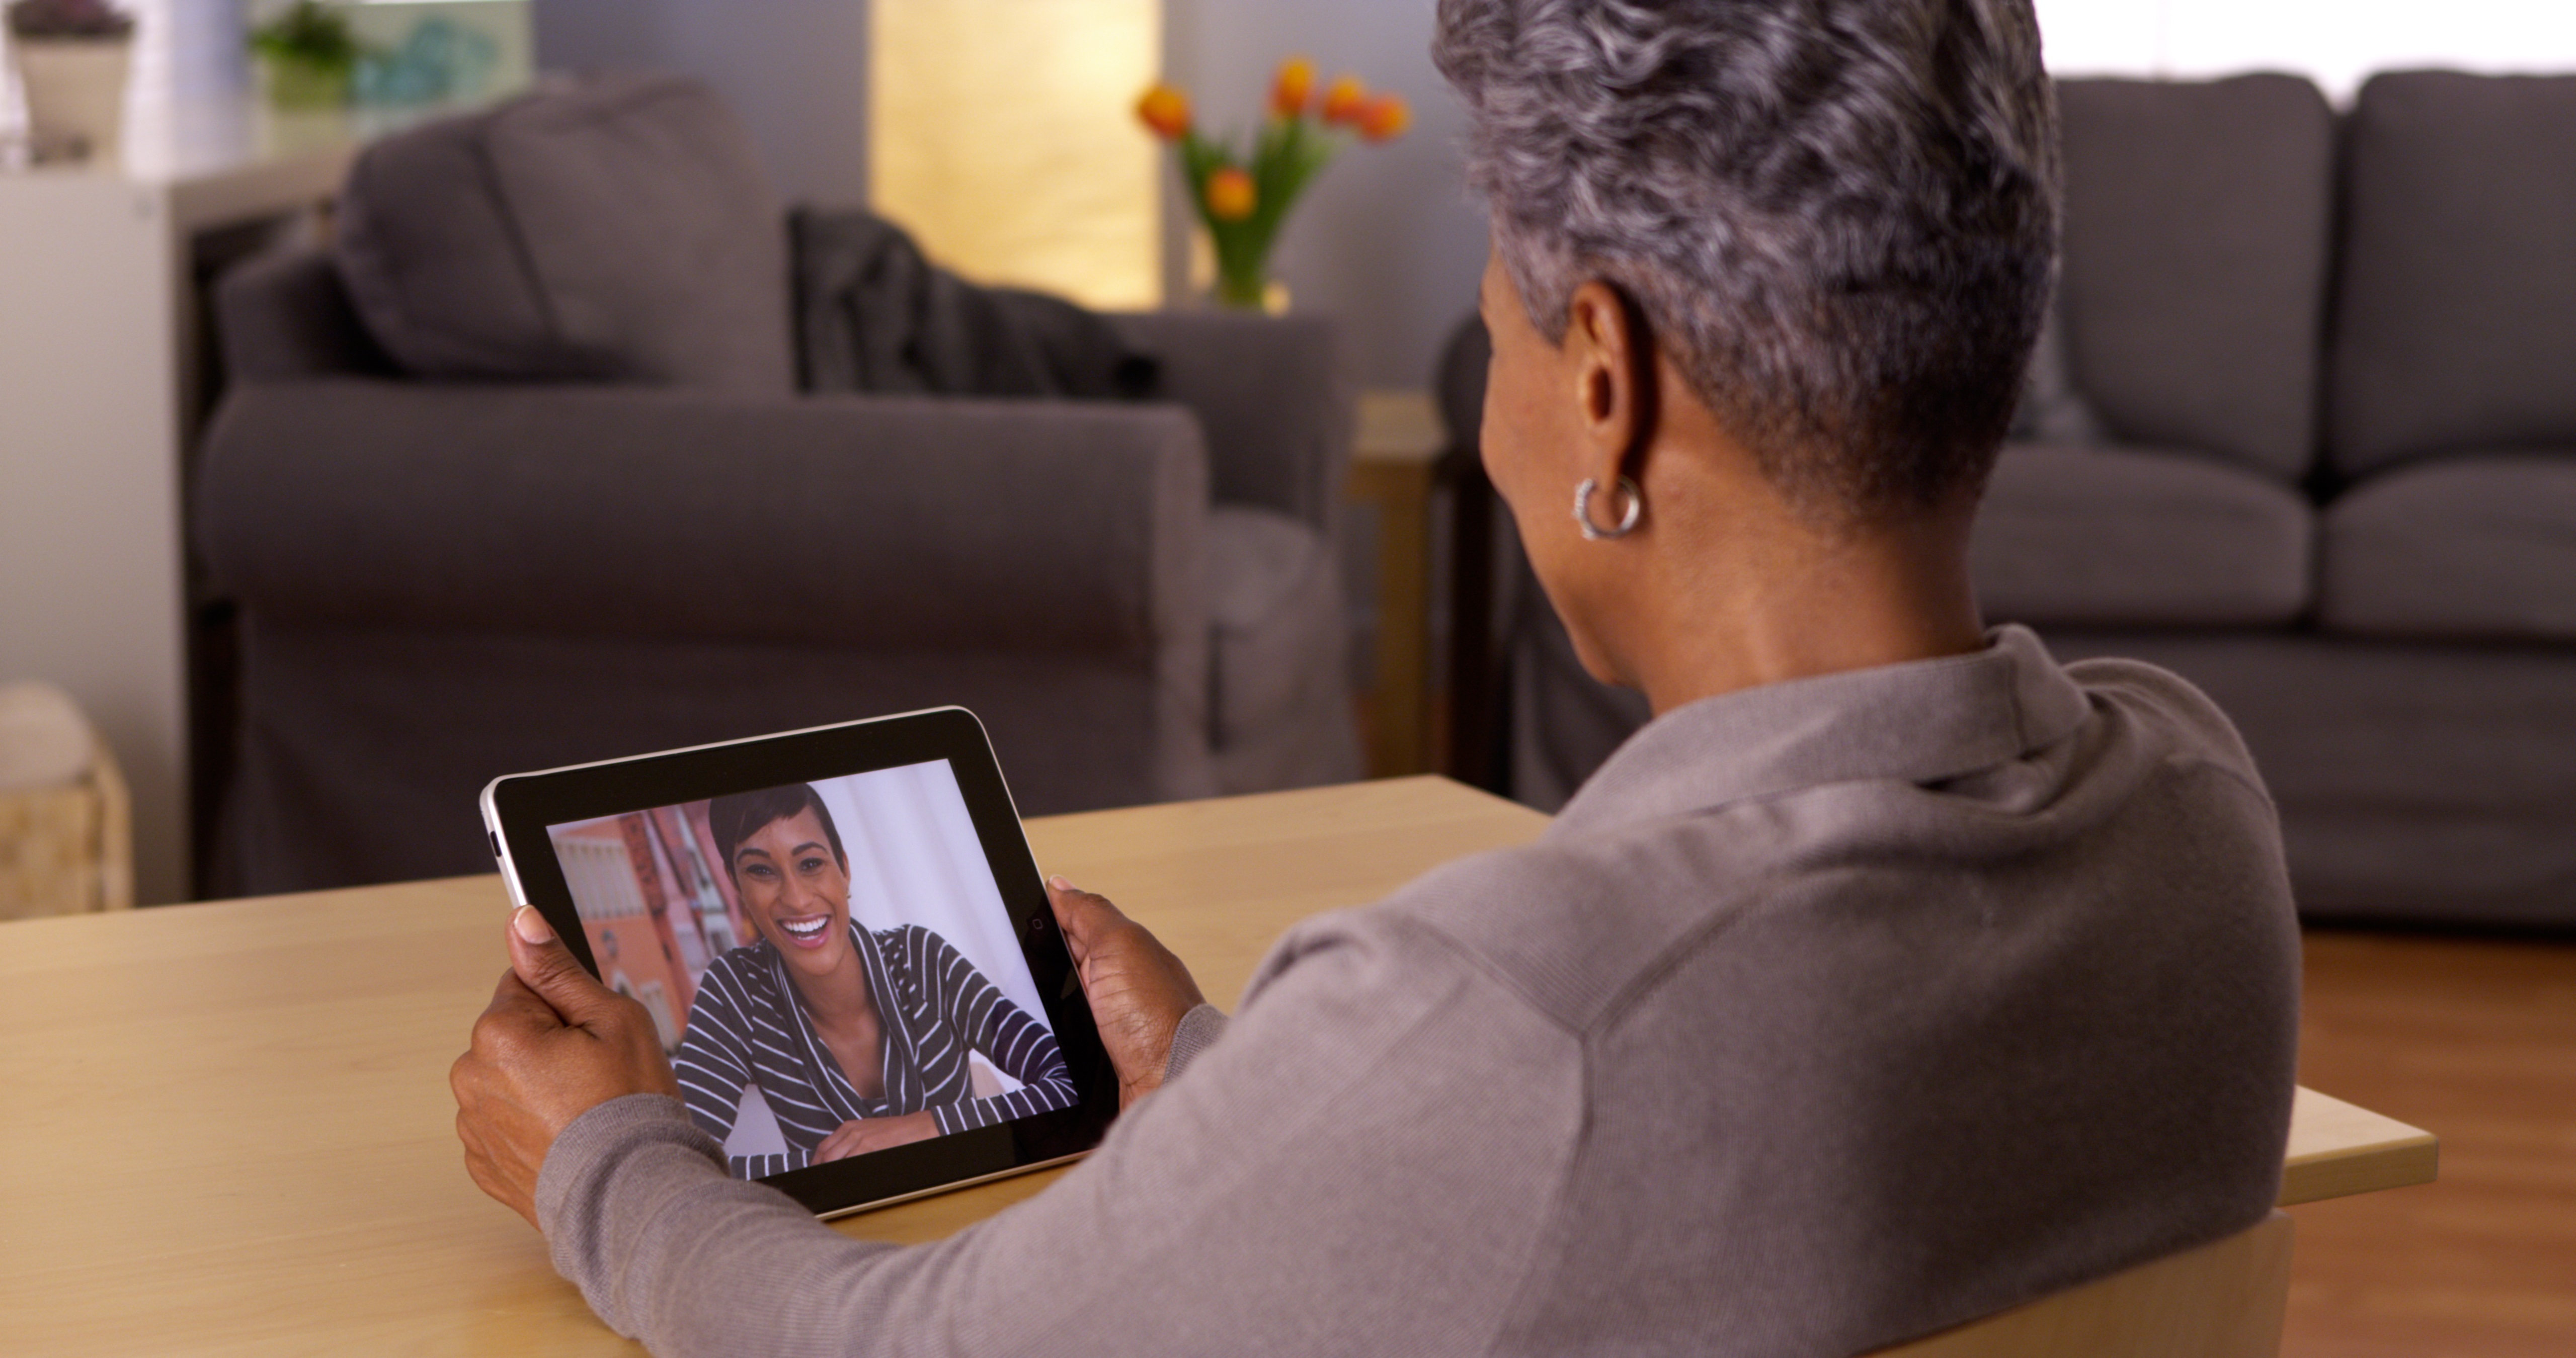 Consumer Perspectives: Telehealth Is Critical for Our Behavioral Health During the Pandemic